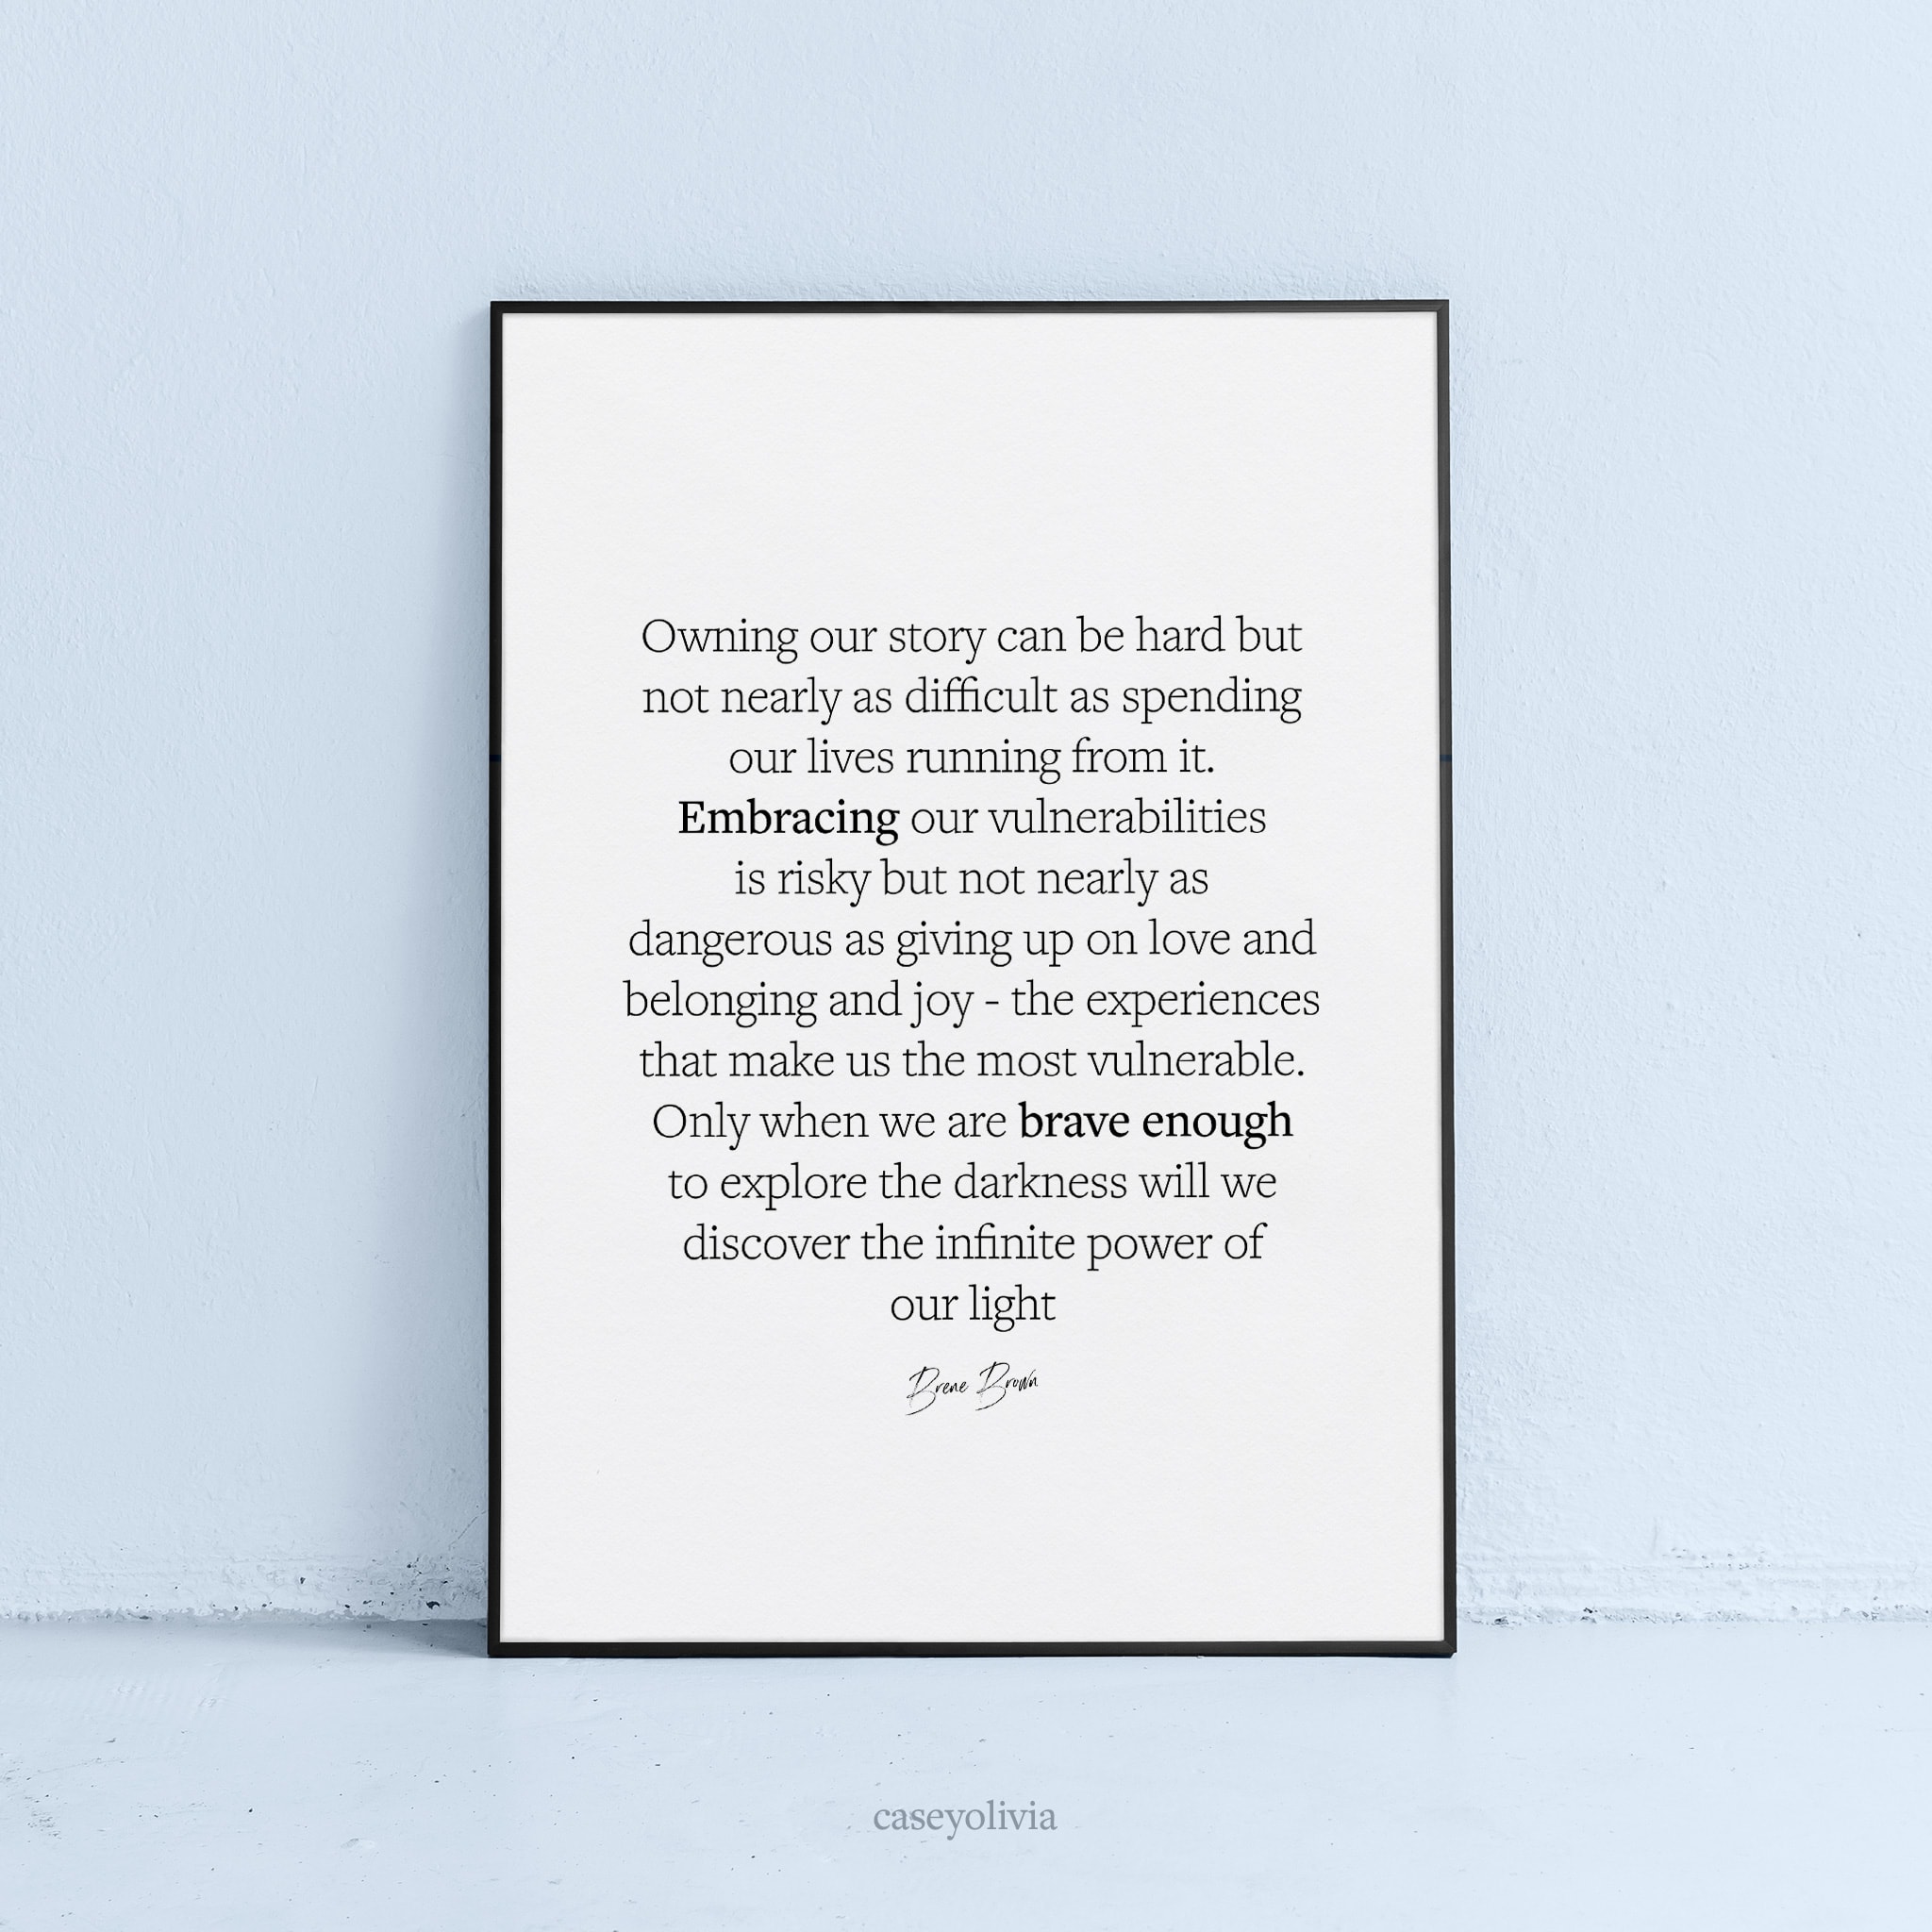 brene brown infinite power of our light quote printable wall art